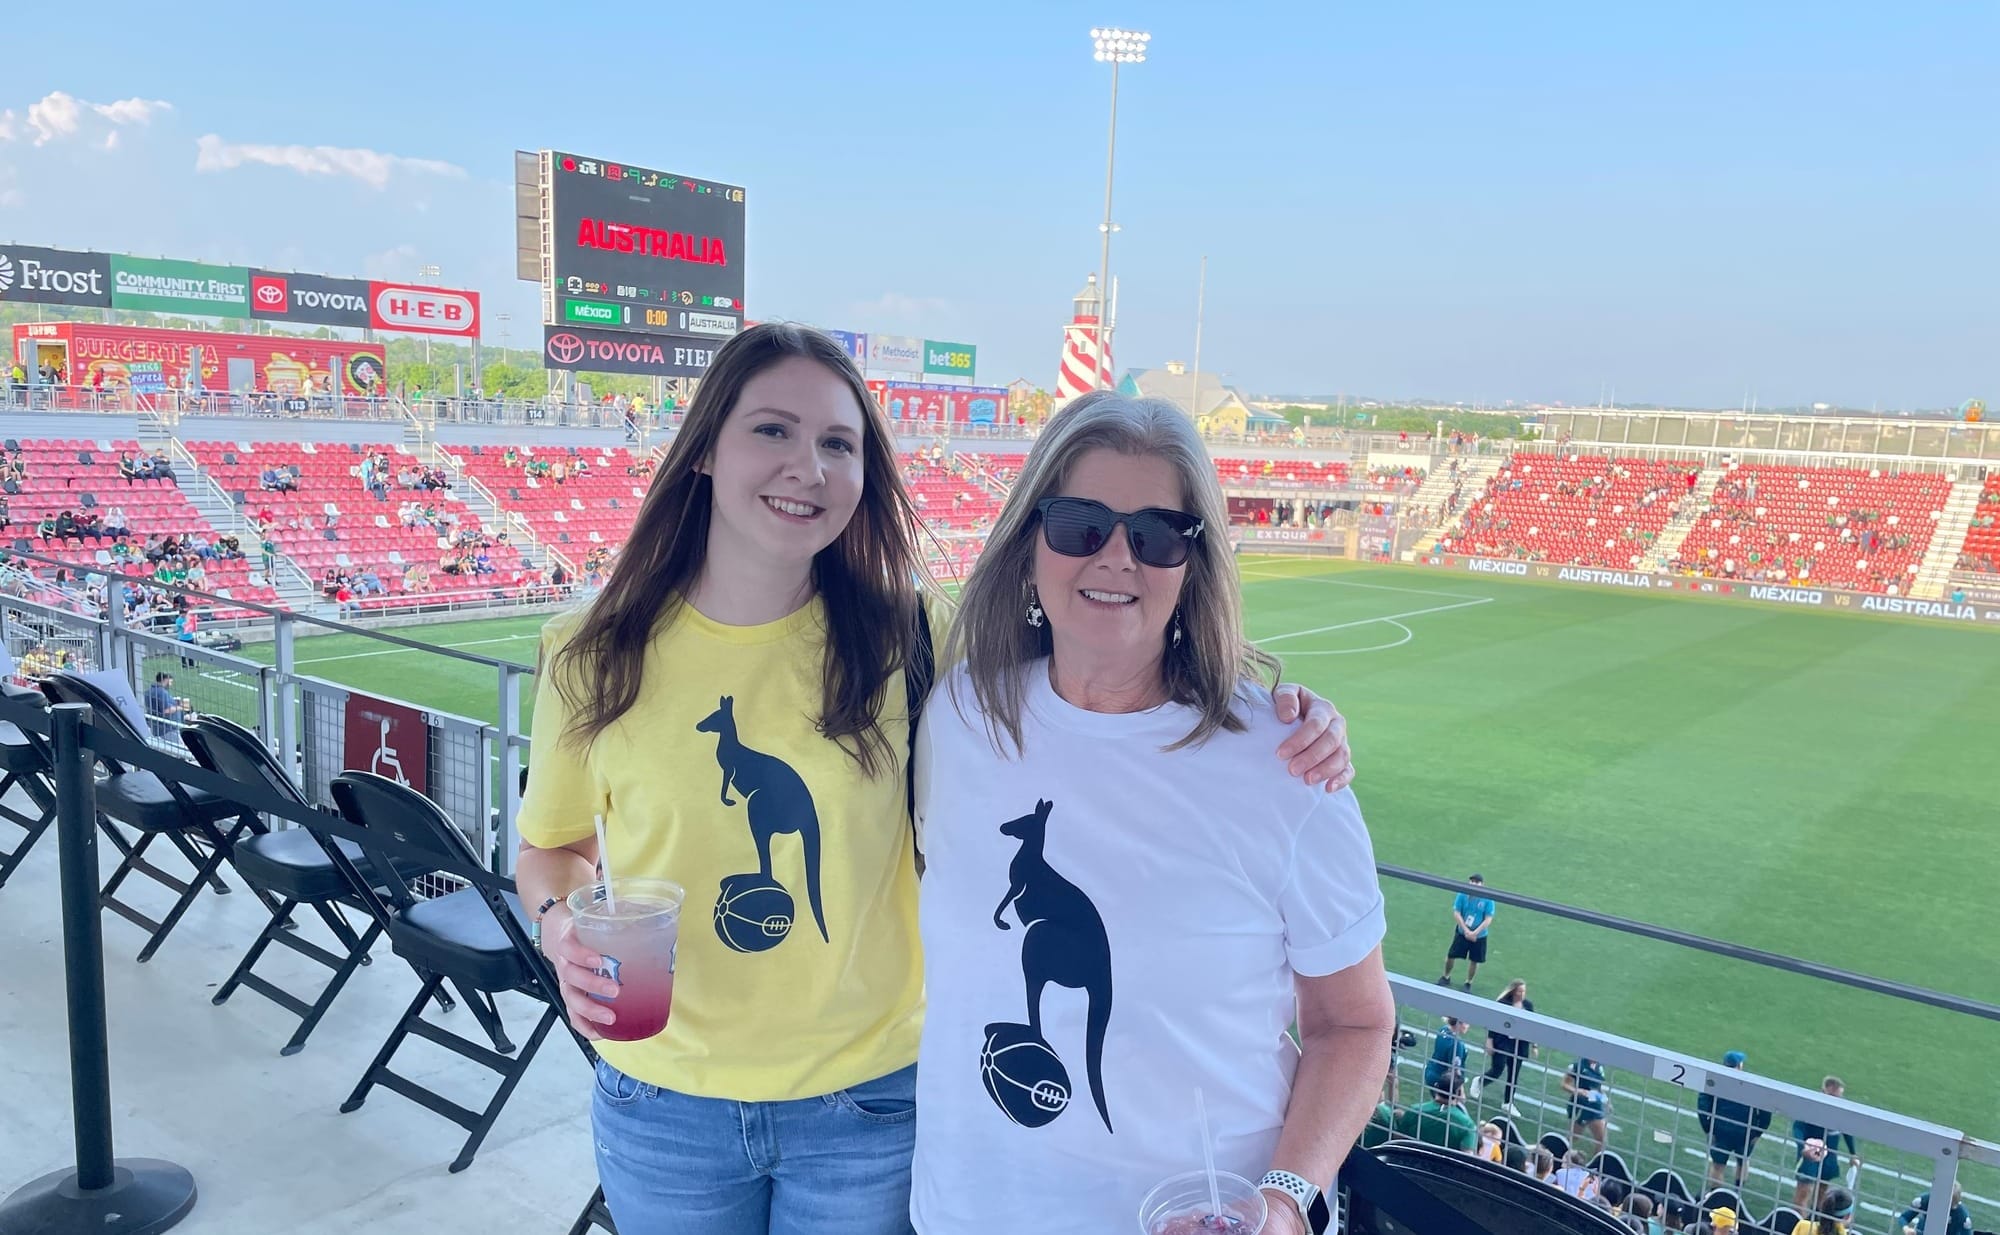 My mom and me posing above the pitch at Toyota Field in our "Spurstralia" shirts.